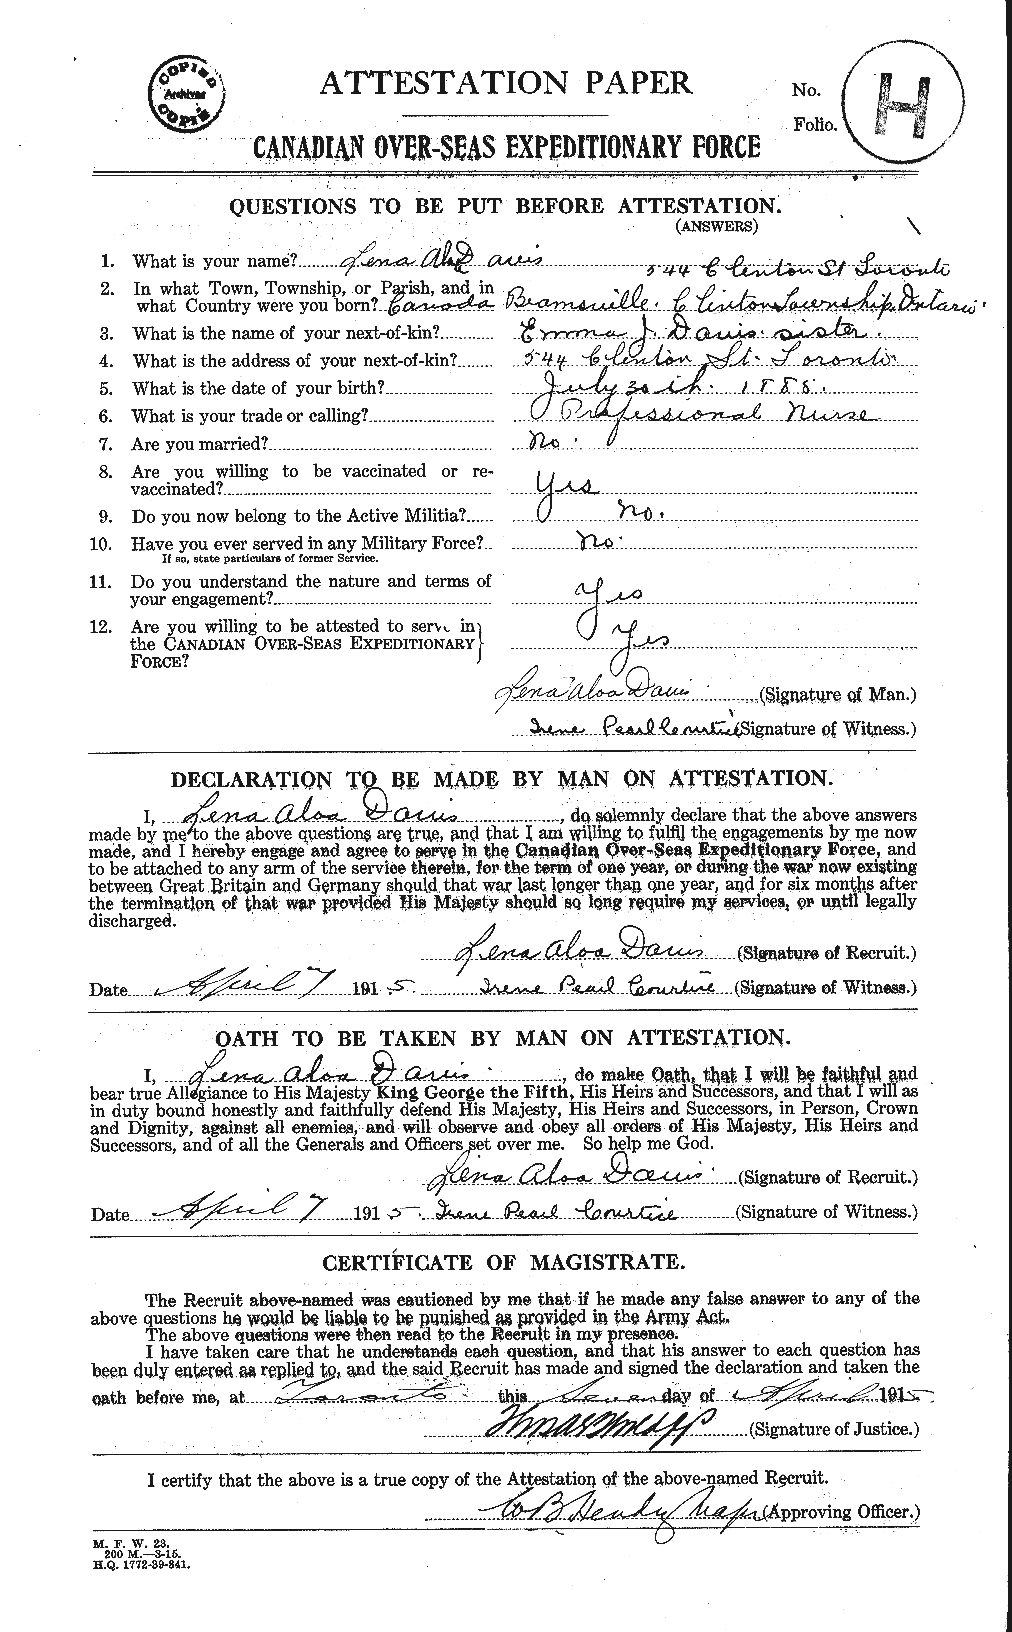 Personnel Records of the First World War - CEF 237287a